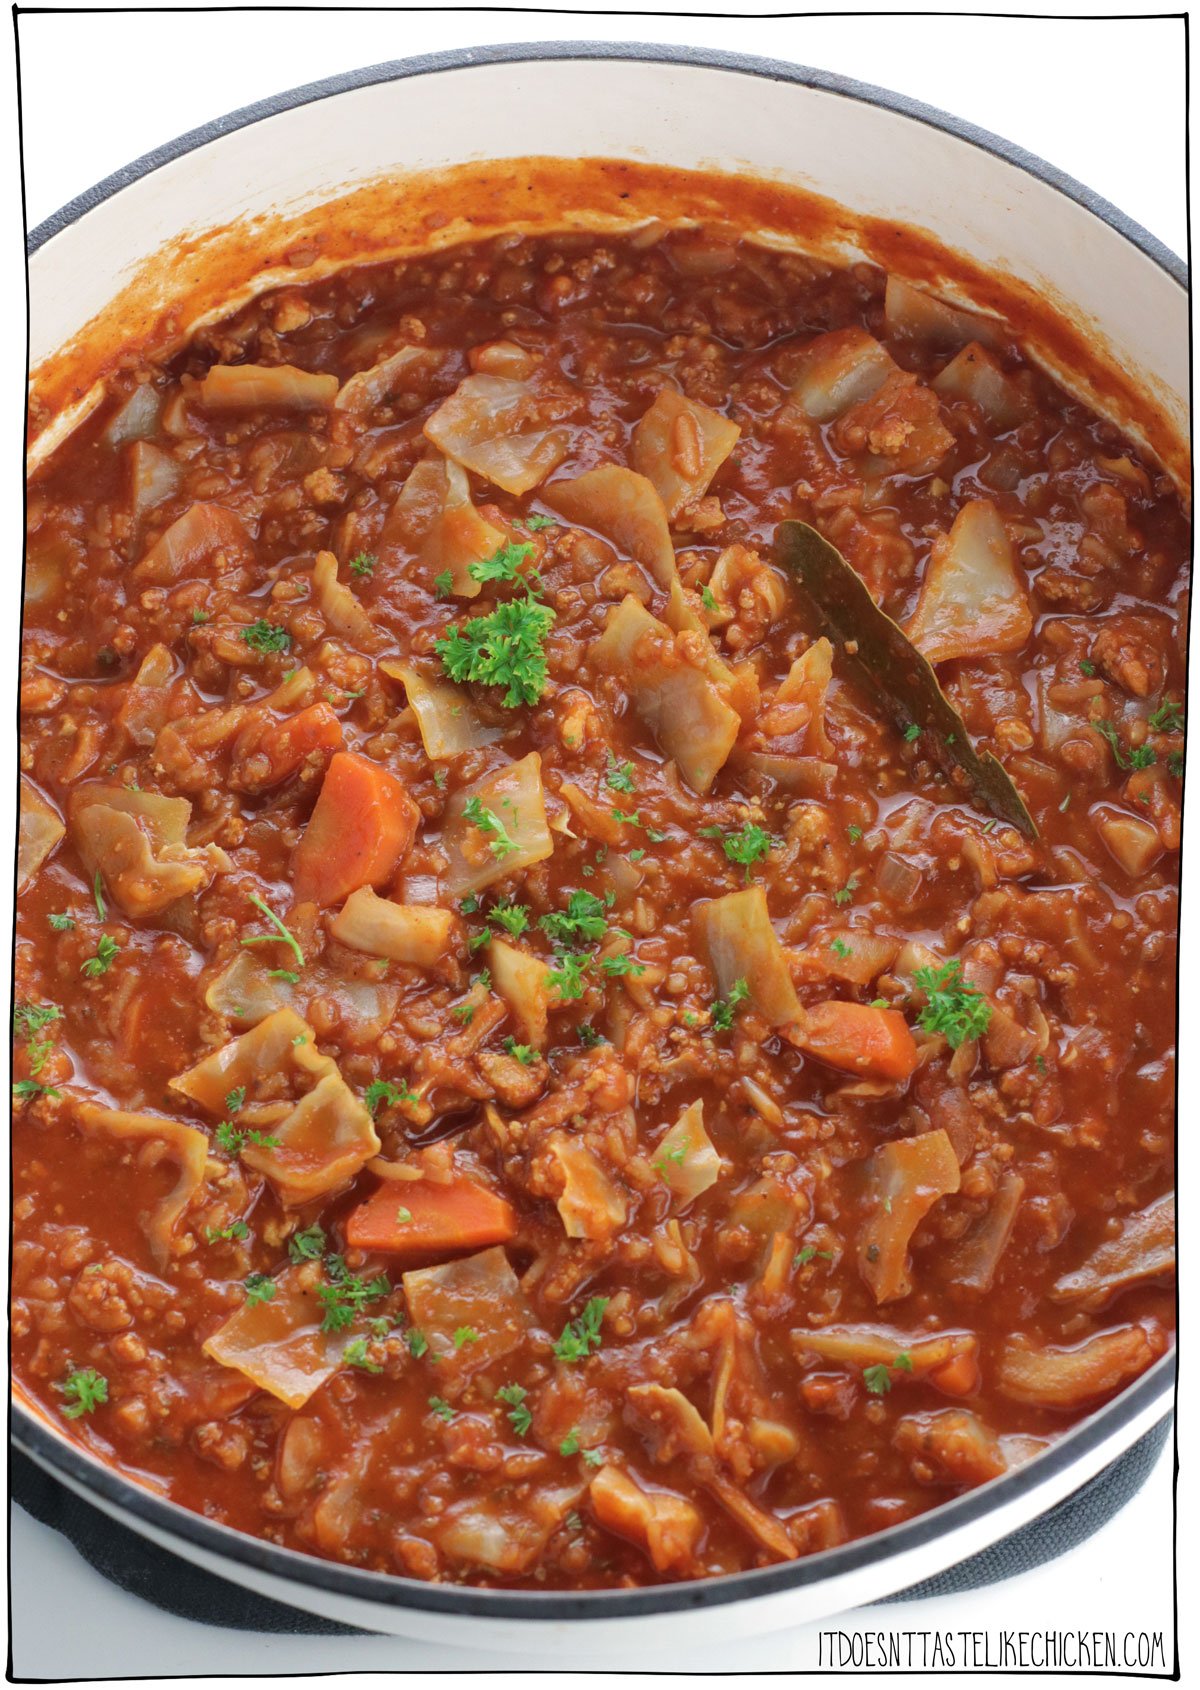 This Easy Vegan Cabbage Roll Soup tastes just like cabbage rolls, but it is so much easier to make! Very hearty and filling and made with easy-to-find and inexpensive ingredients including cabbage, tofu, rice, and canned tomatoes. If you love cabbage rolls, but don't like all the work, this unstuffed cabbage roll soup is for you! #itdoesnttastelikechicken #veganrecipes #soup